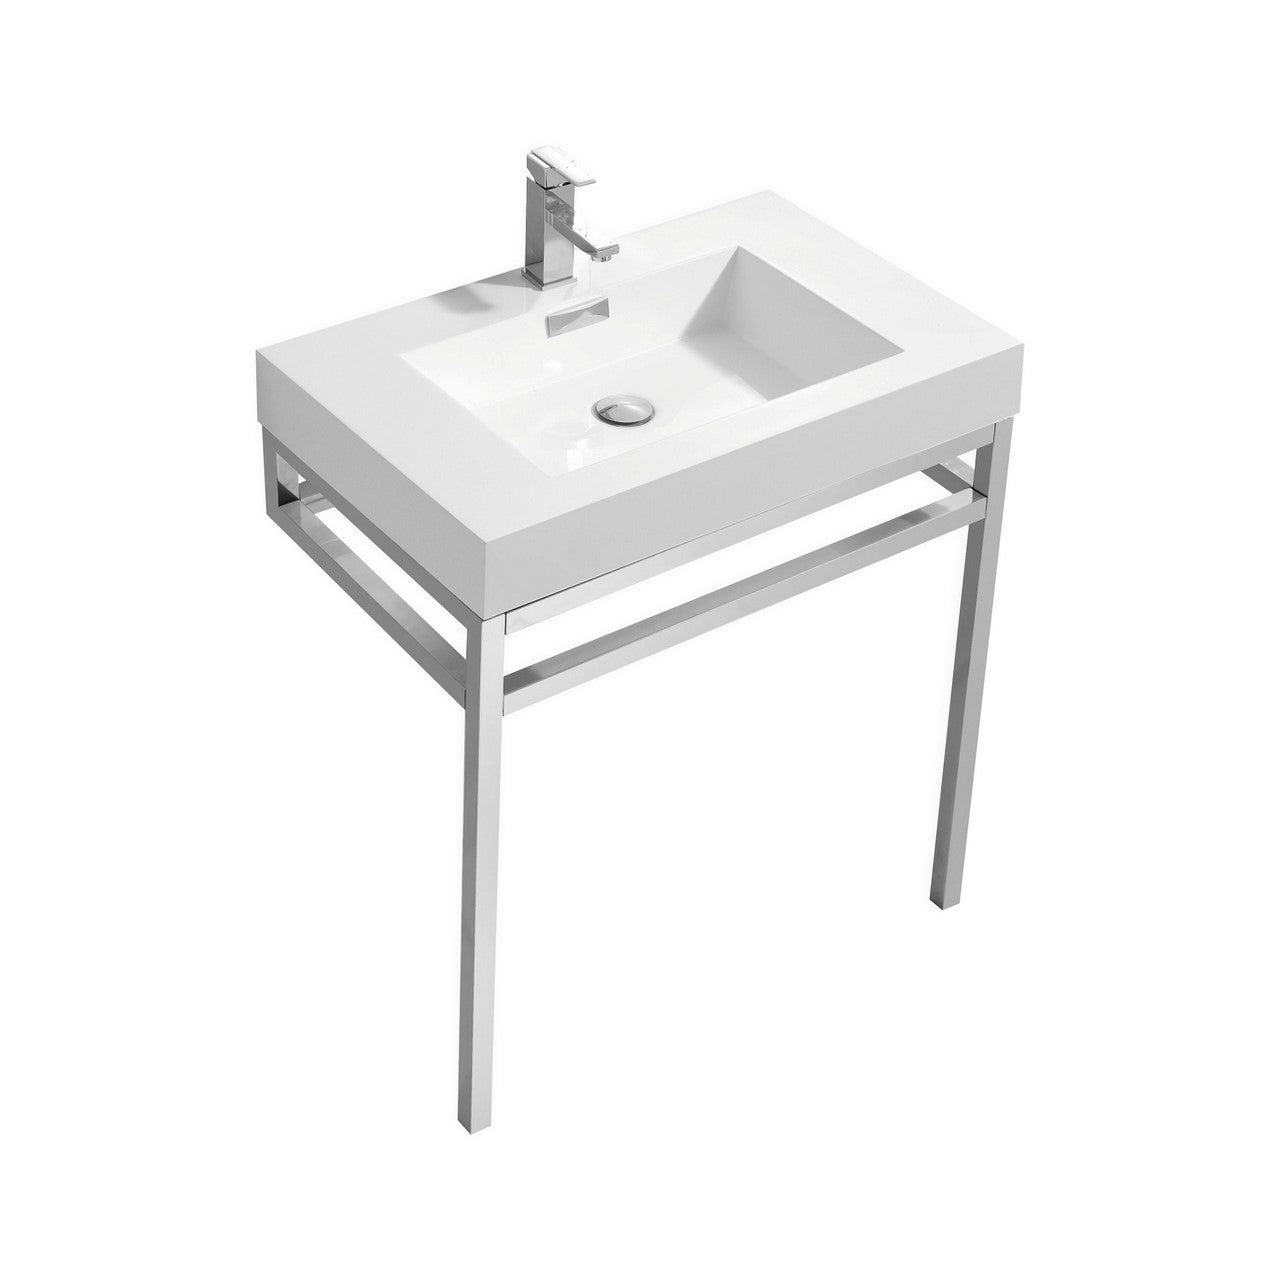 Haus 30″ Inch Stainless Steel Console W/ White Acrylic Sink – Chrome